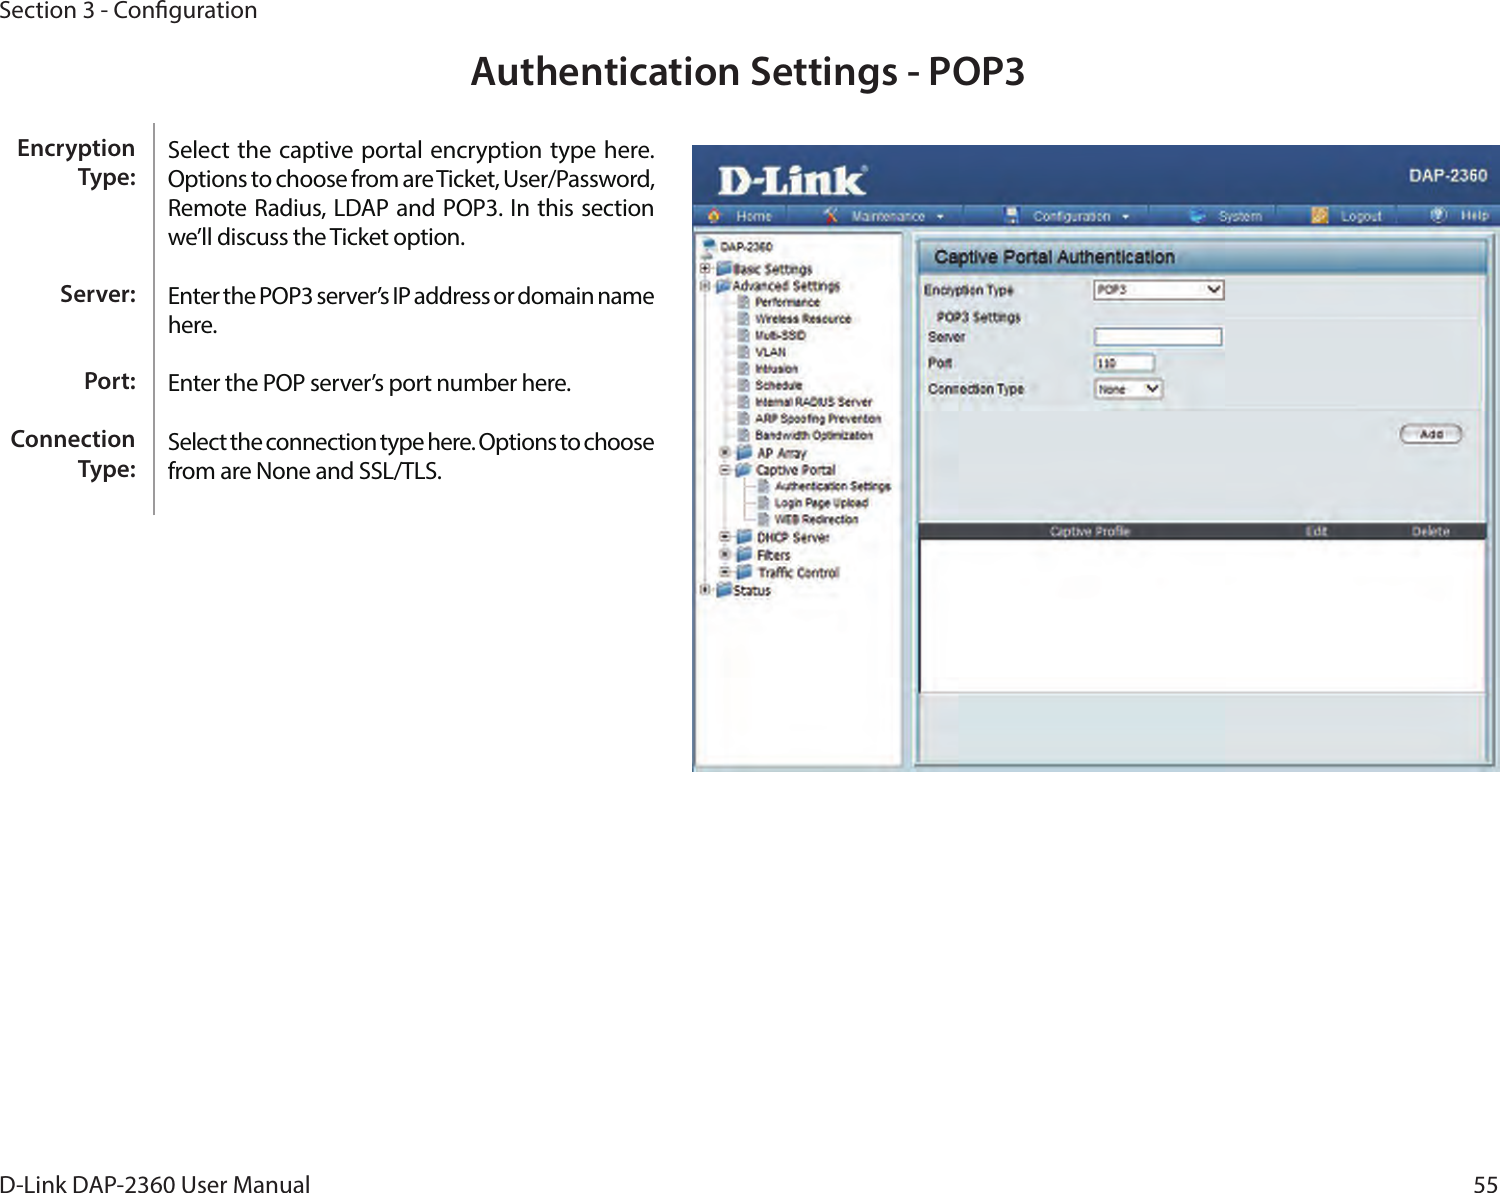 55D-Link DAP-2360 User ManualSection 3 - CongurationAuthentication Settings - POP3Select the captive portal encryption type here. Options to choose from are Ticket, User/Password, Remote Radius, LDAP and POP3. In this section we’ll discuss the Ticket option.Enter the POP3 server’s IP address or domain name here.Enter the POP server’s port number here.Select the connection type here. Options to choose from are None and SSL/TLS.Encryption Type:Server:Port:Connection Type: